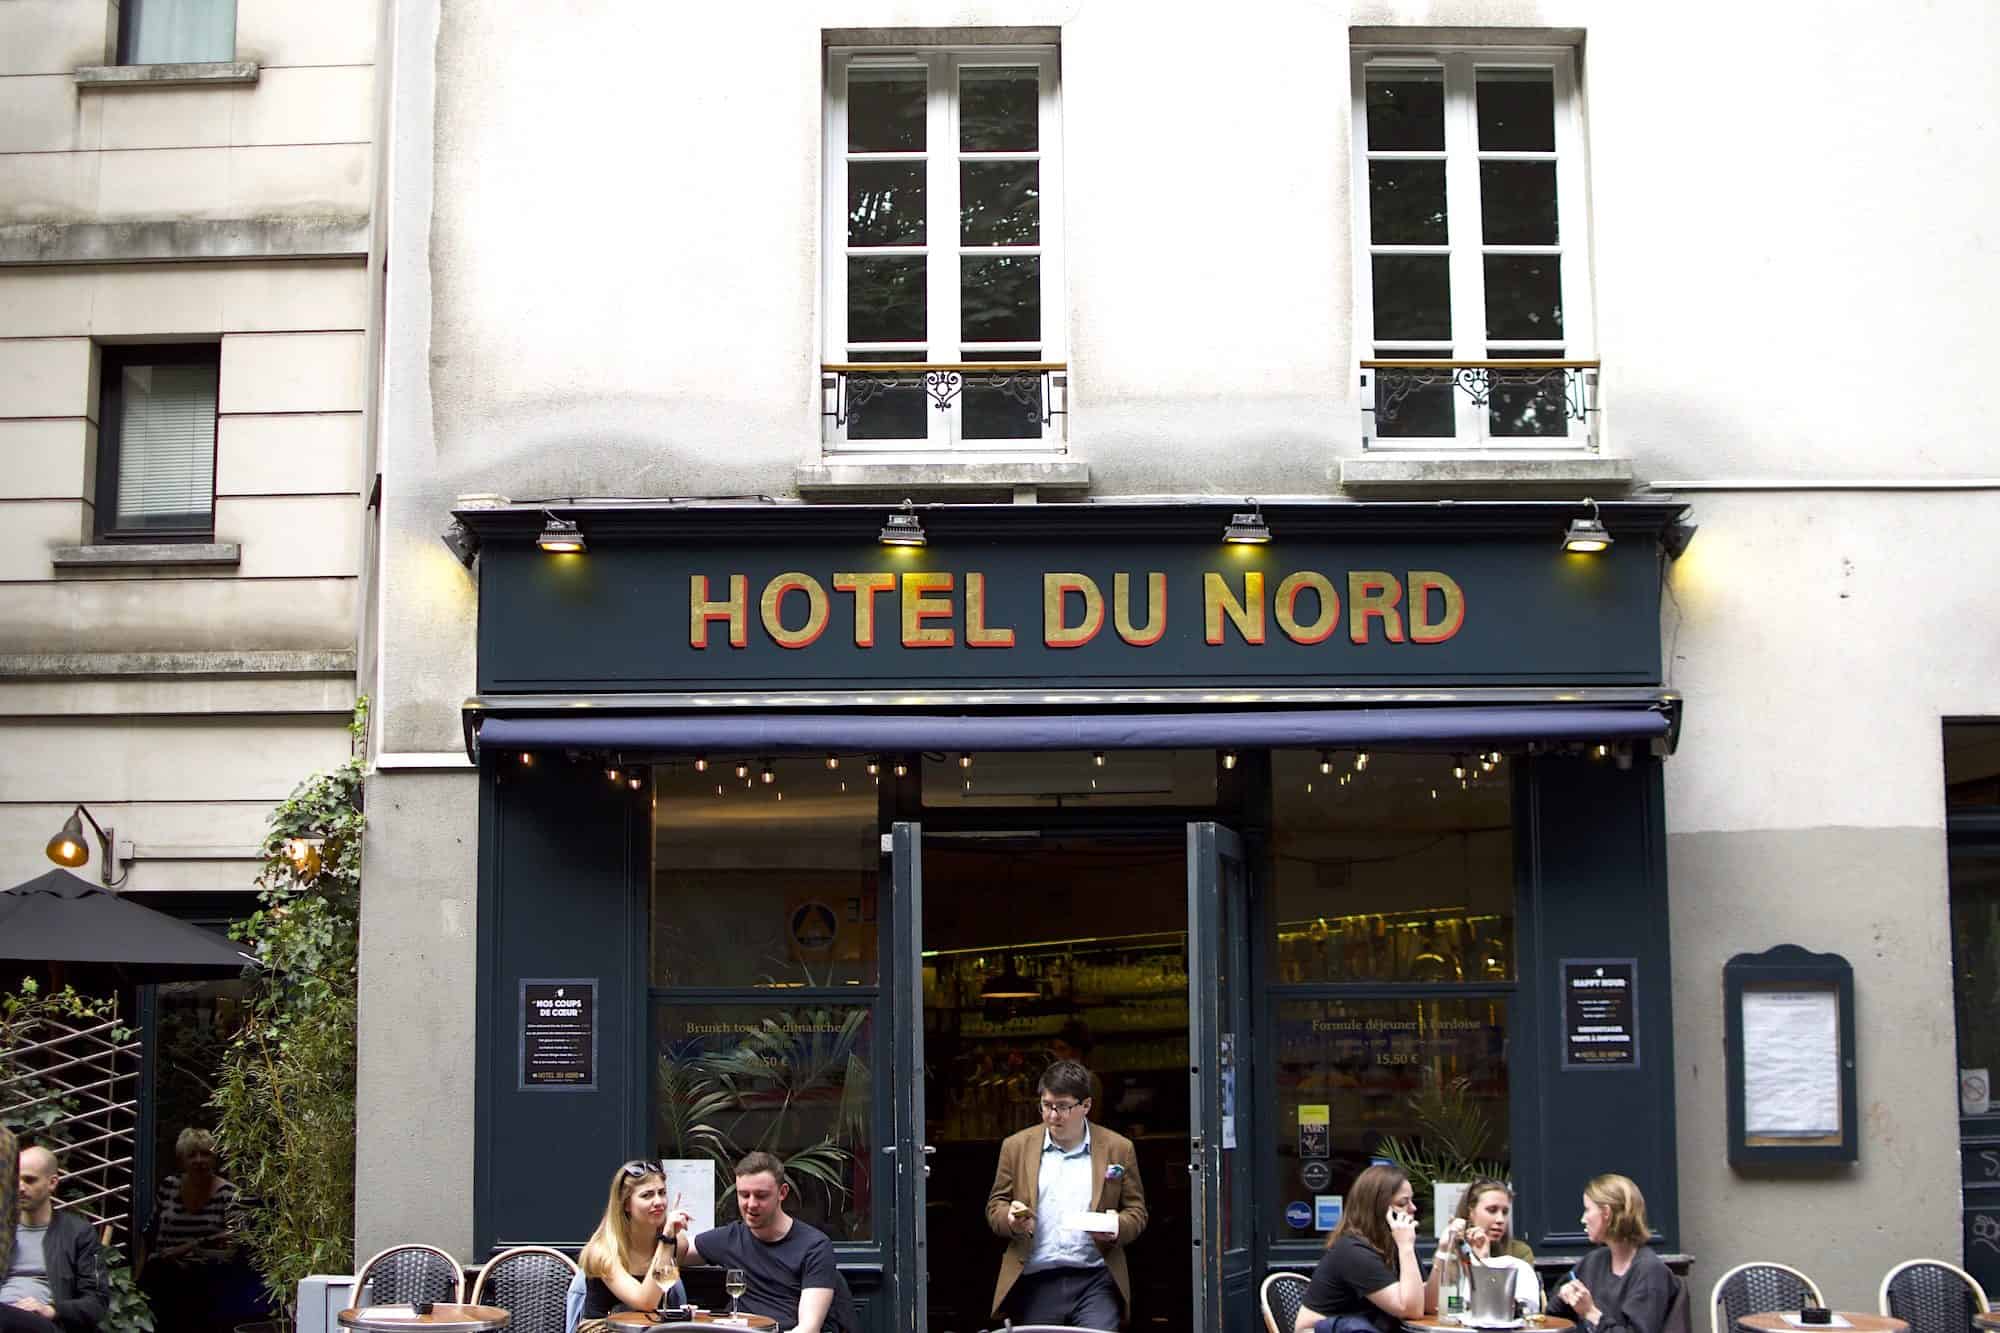 Outside iconic Parisian restaurant the Hotel du Nord on the Canal Saint Martin.